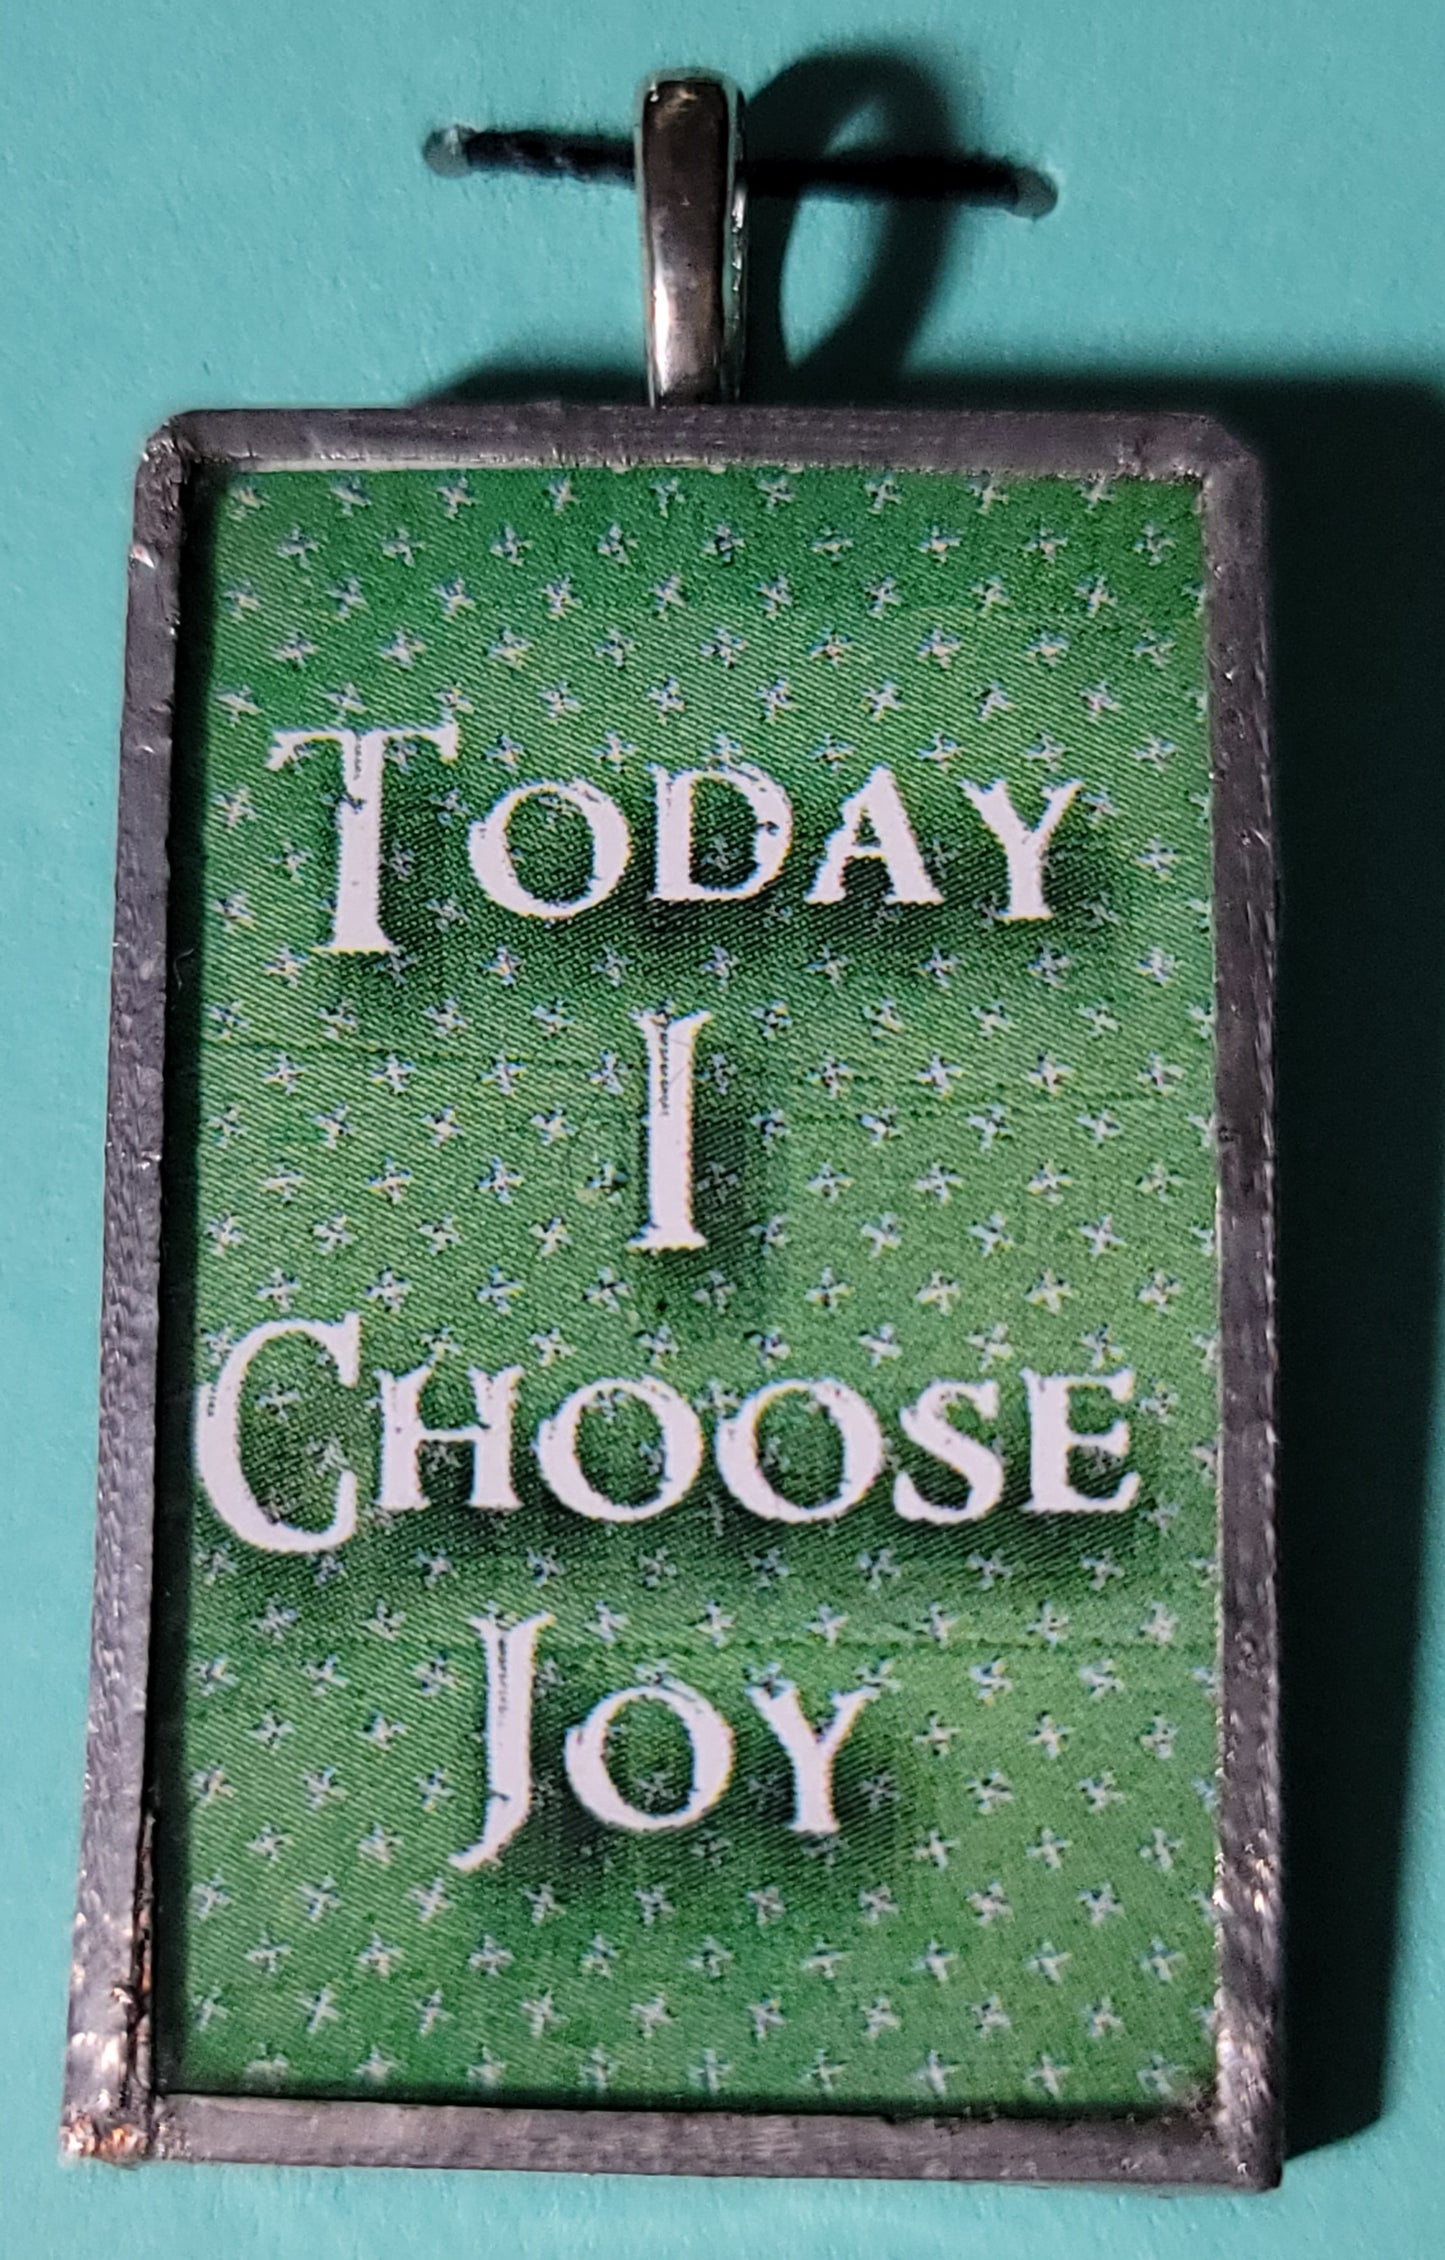 Today I Choose Joy Handmade Stained-Glass Pendant